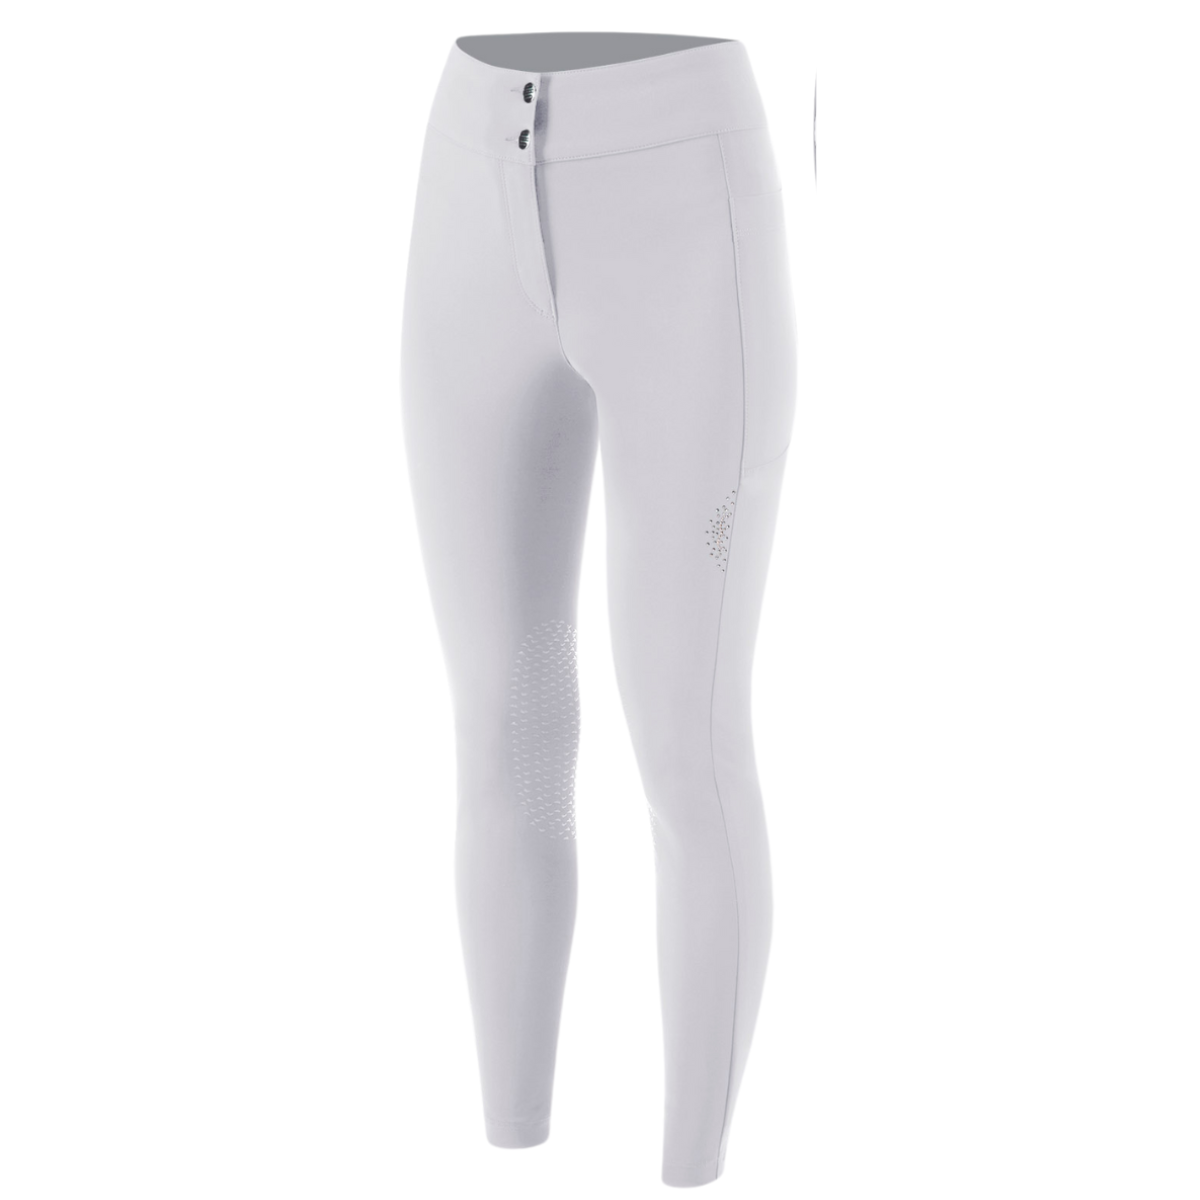 Animo 'Nuvelin' High Rise Breeches in Bianco